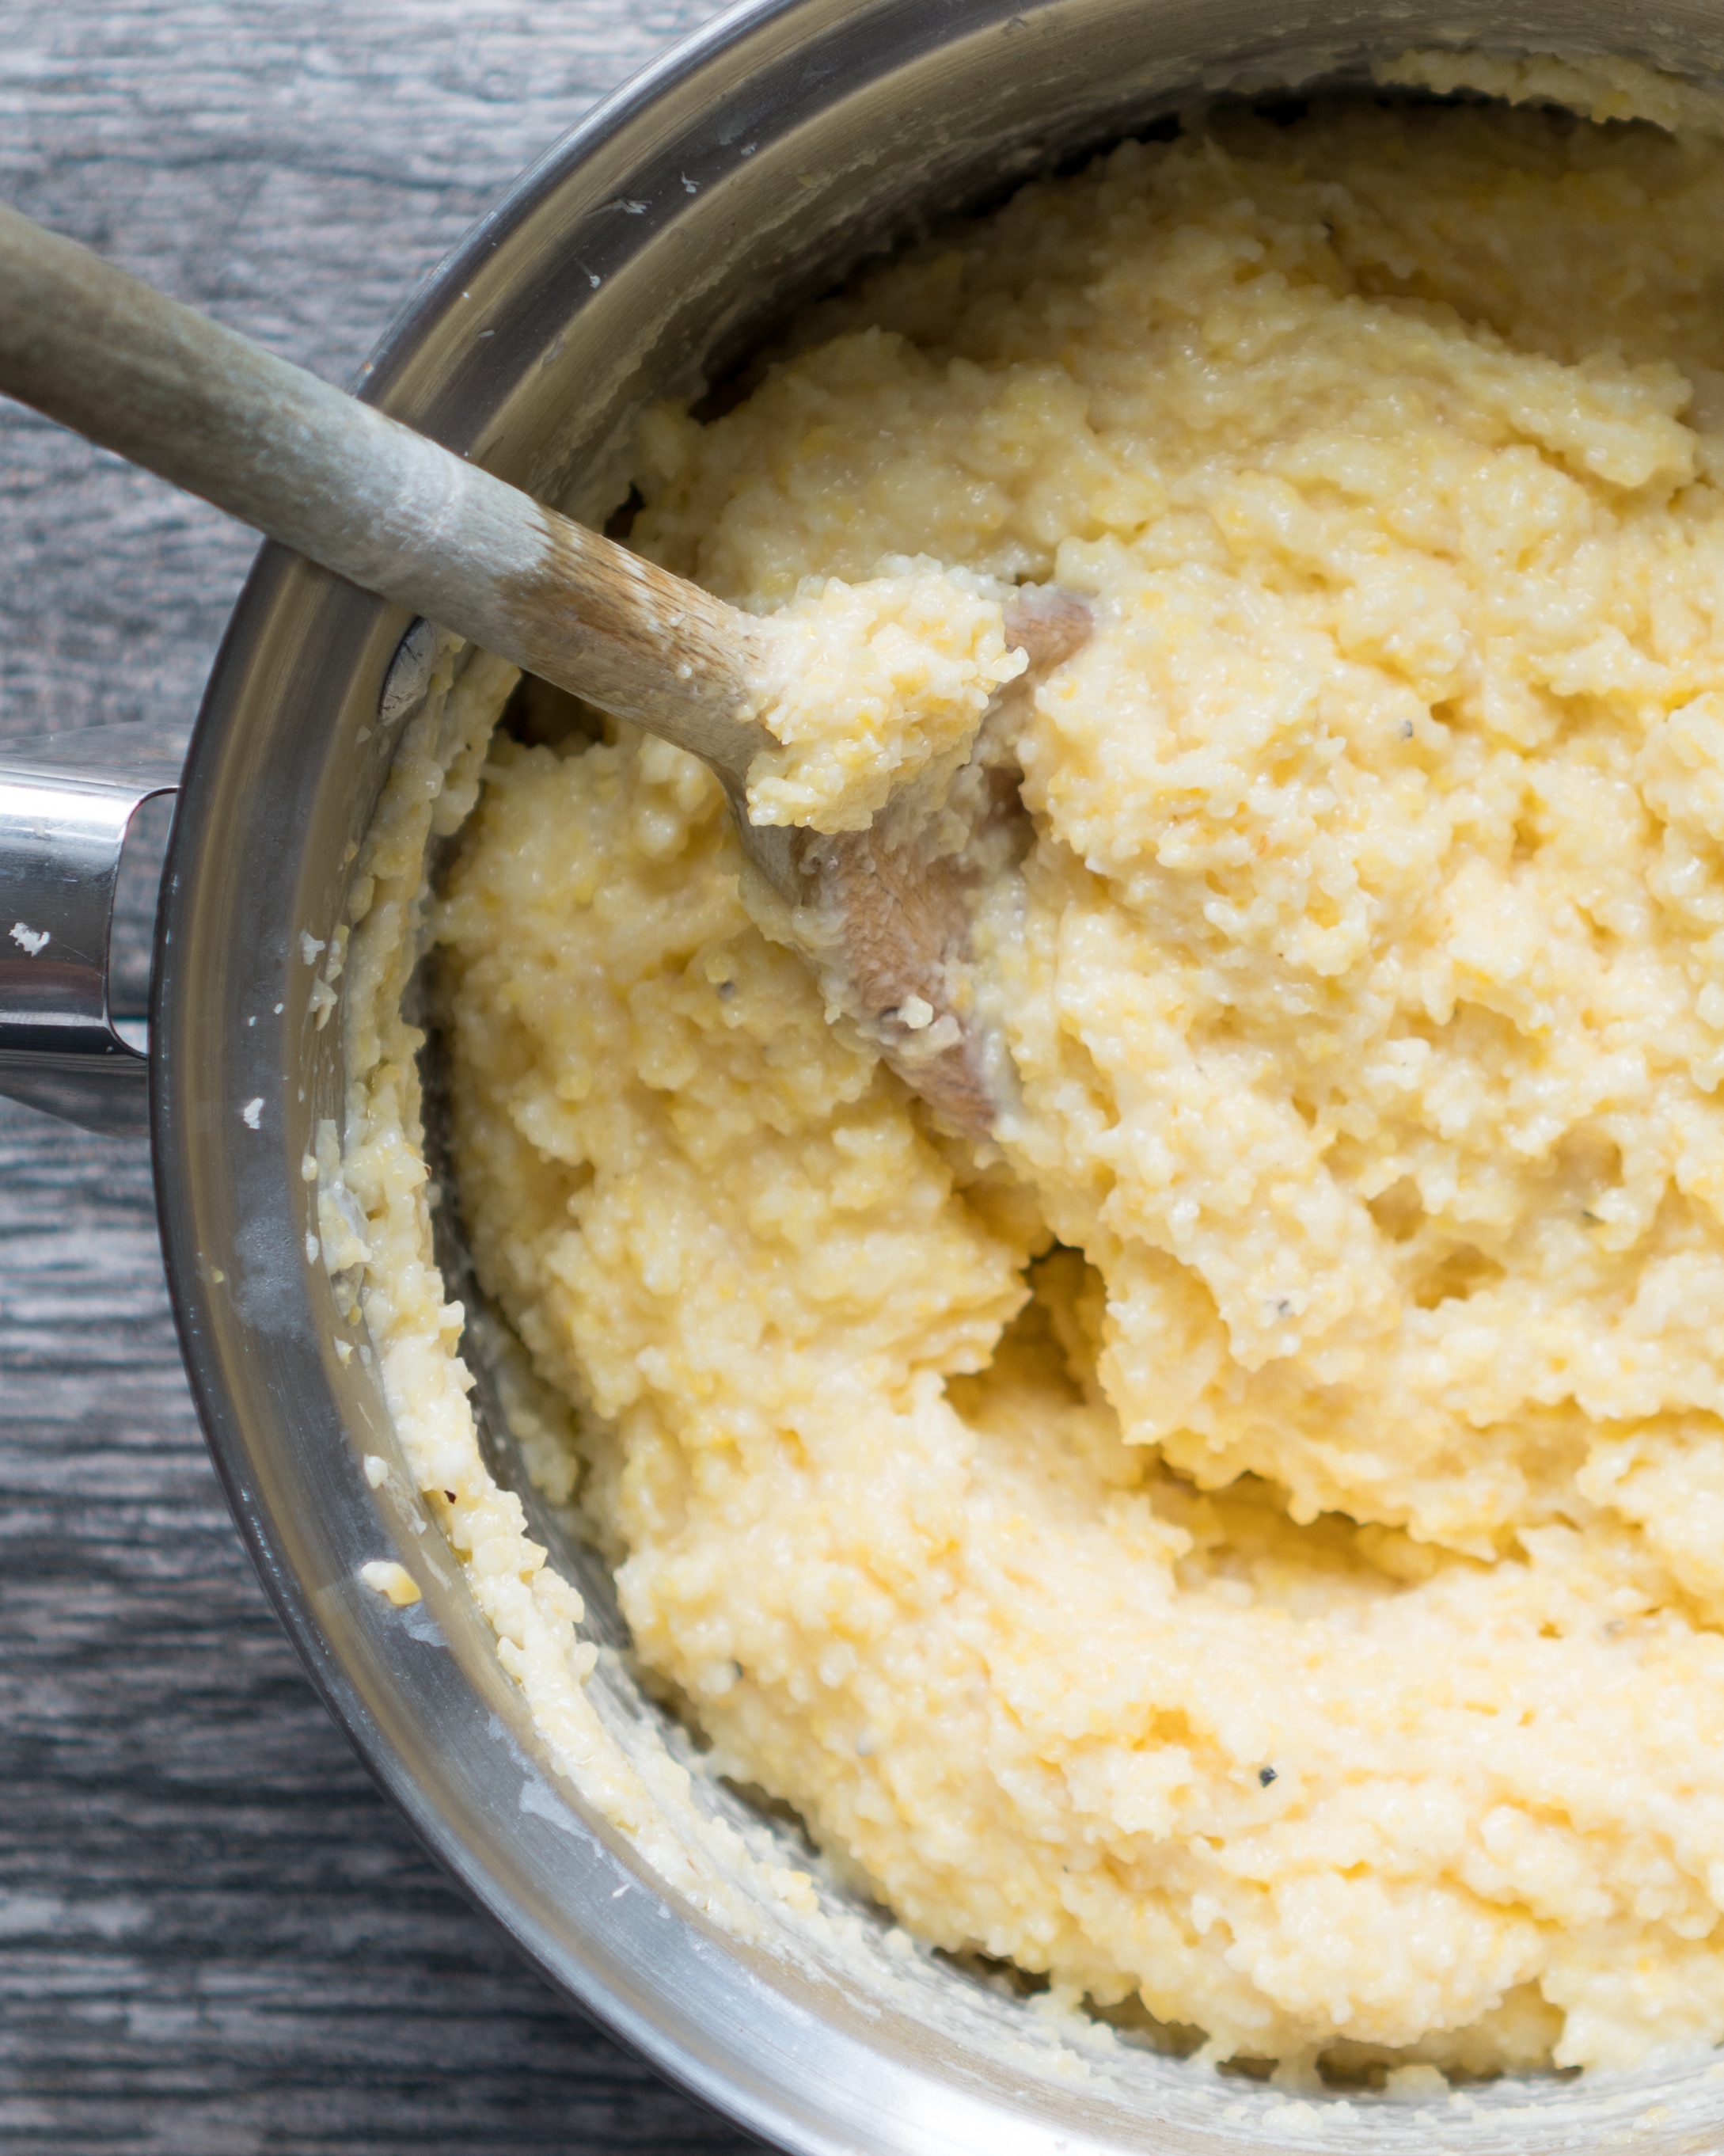 Creamy Parmesan Polenta – Simple stovetop recipe for Creamy Parmesan Polenta! Cooked in broth, almond milk, & fresh garlic with parmesan and creamy cottage cheese melted right in. A gluten-free dinner ready in under 30 min! ♥ | freeyourfork.com